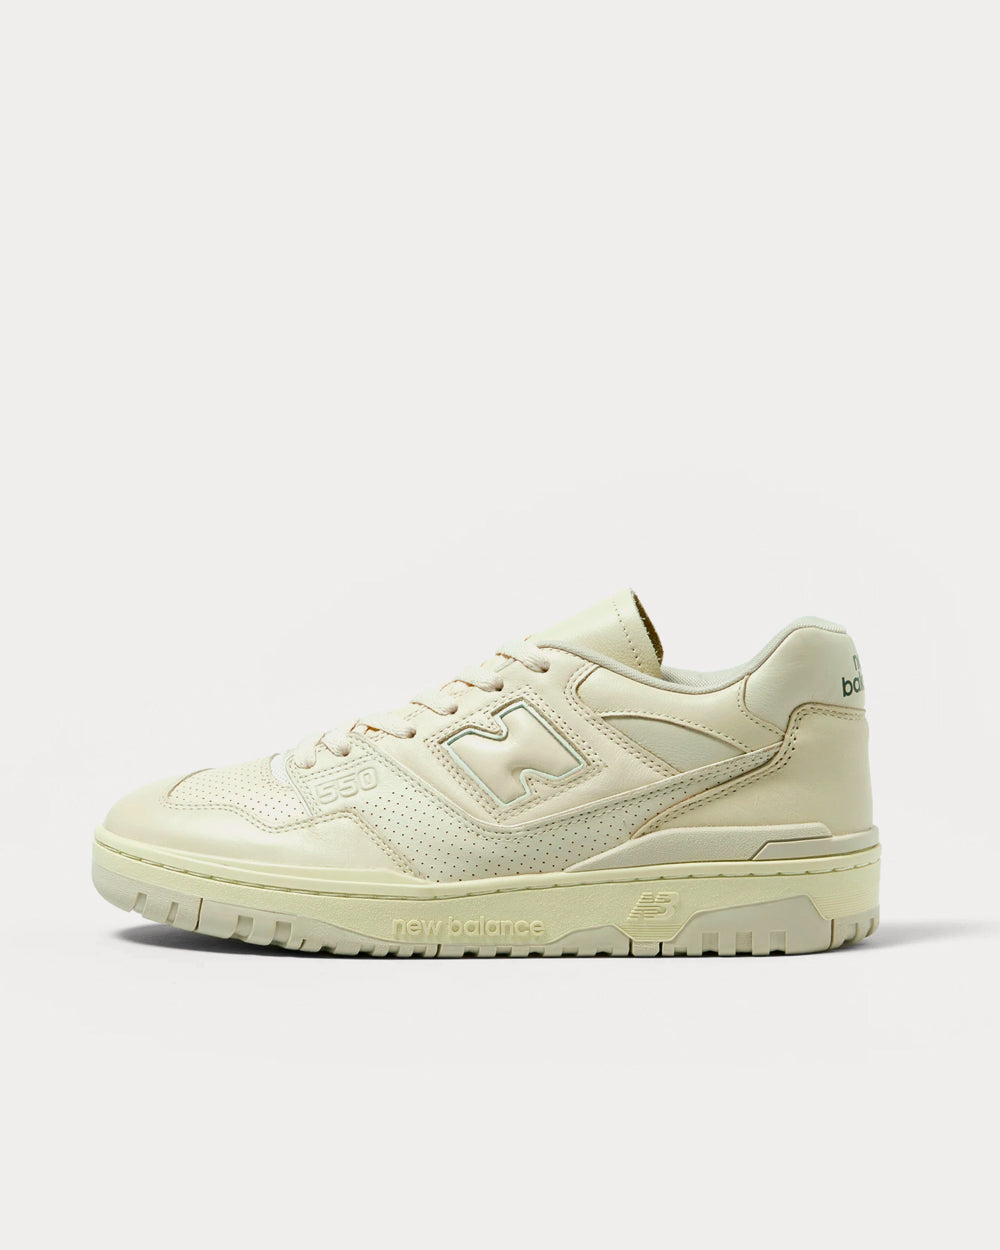 New Balance x Auralee - 550 White Low Top Sneakers